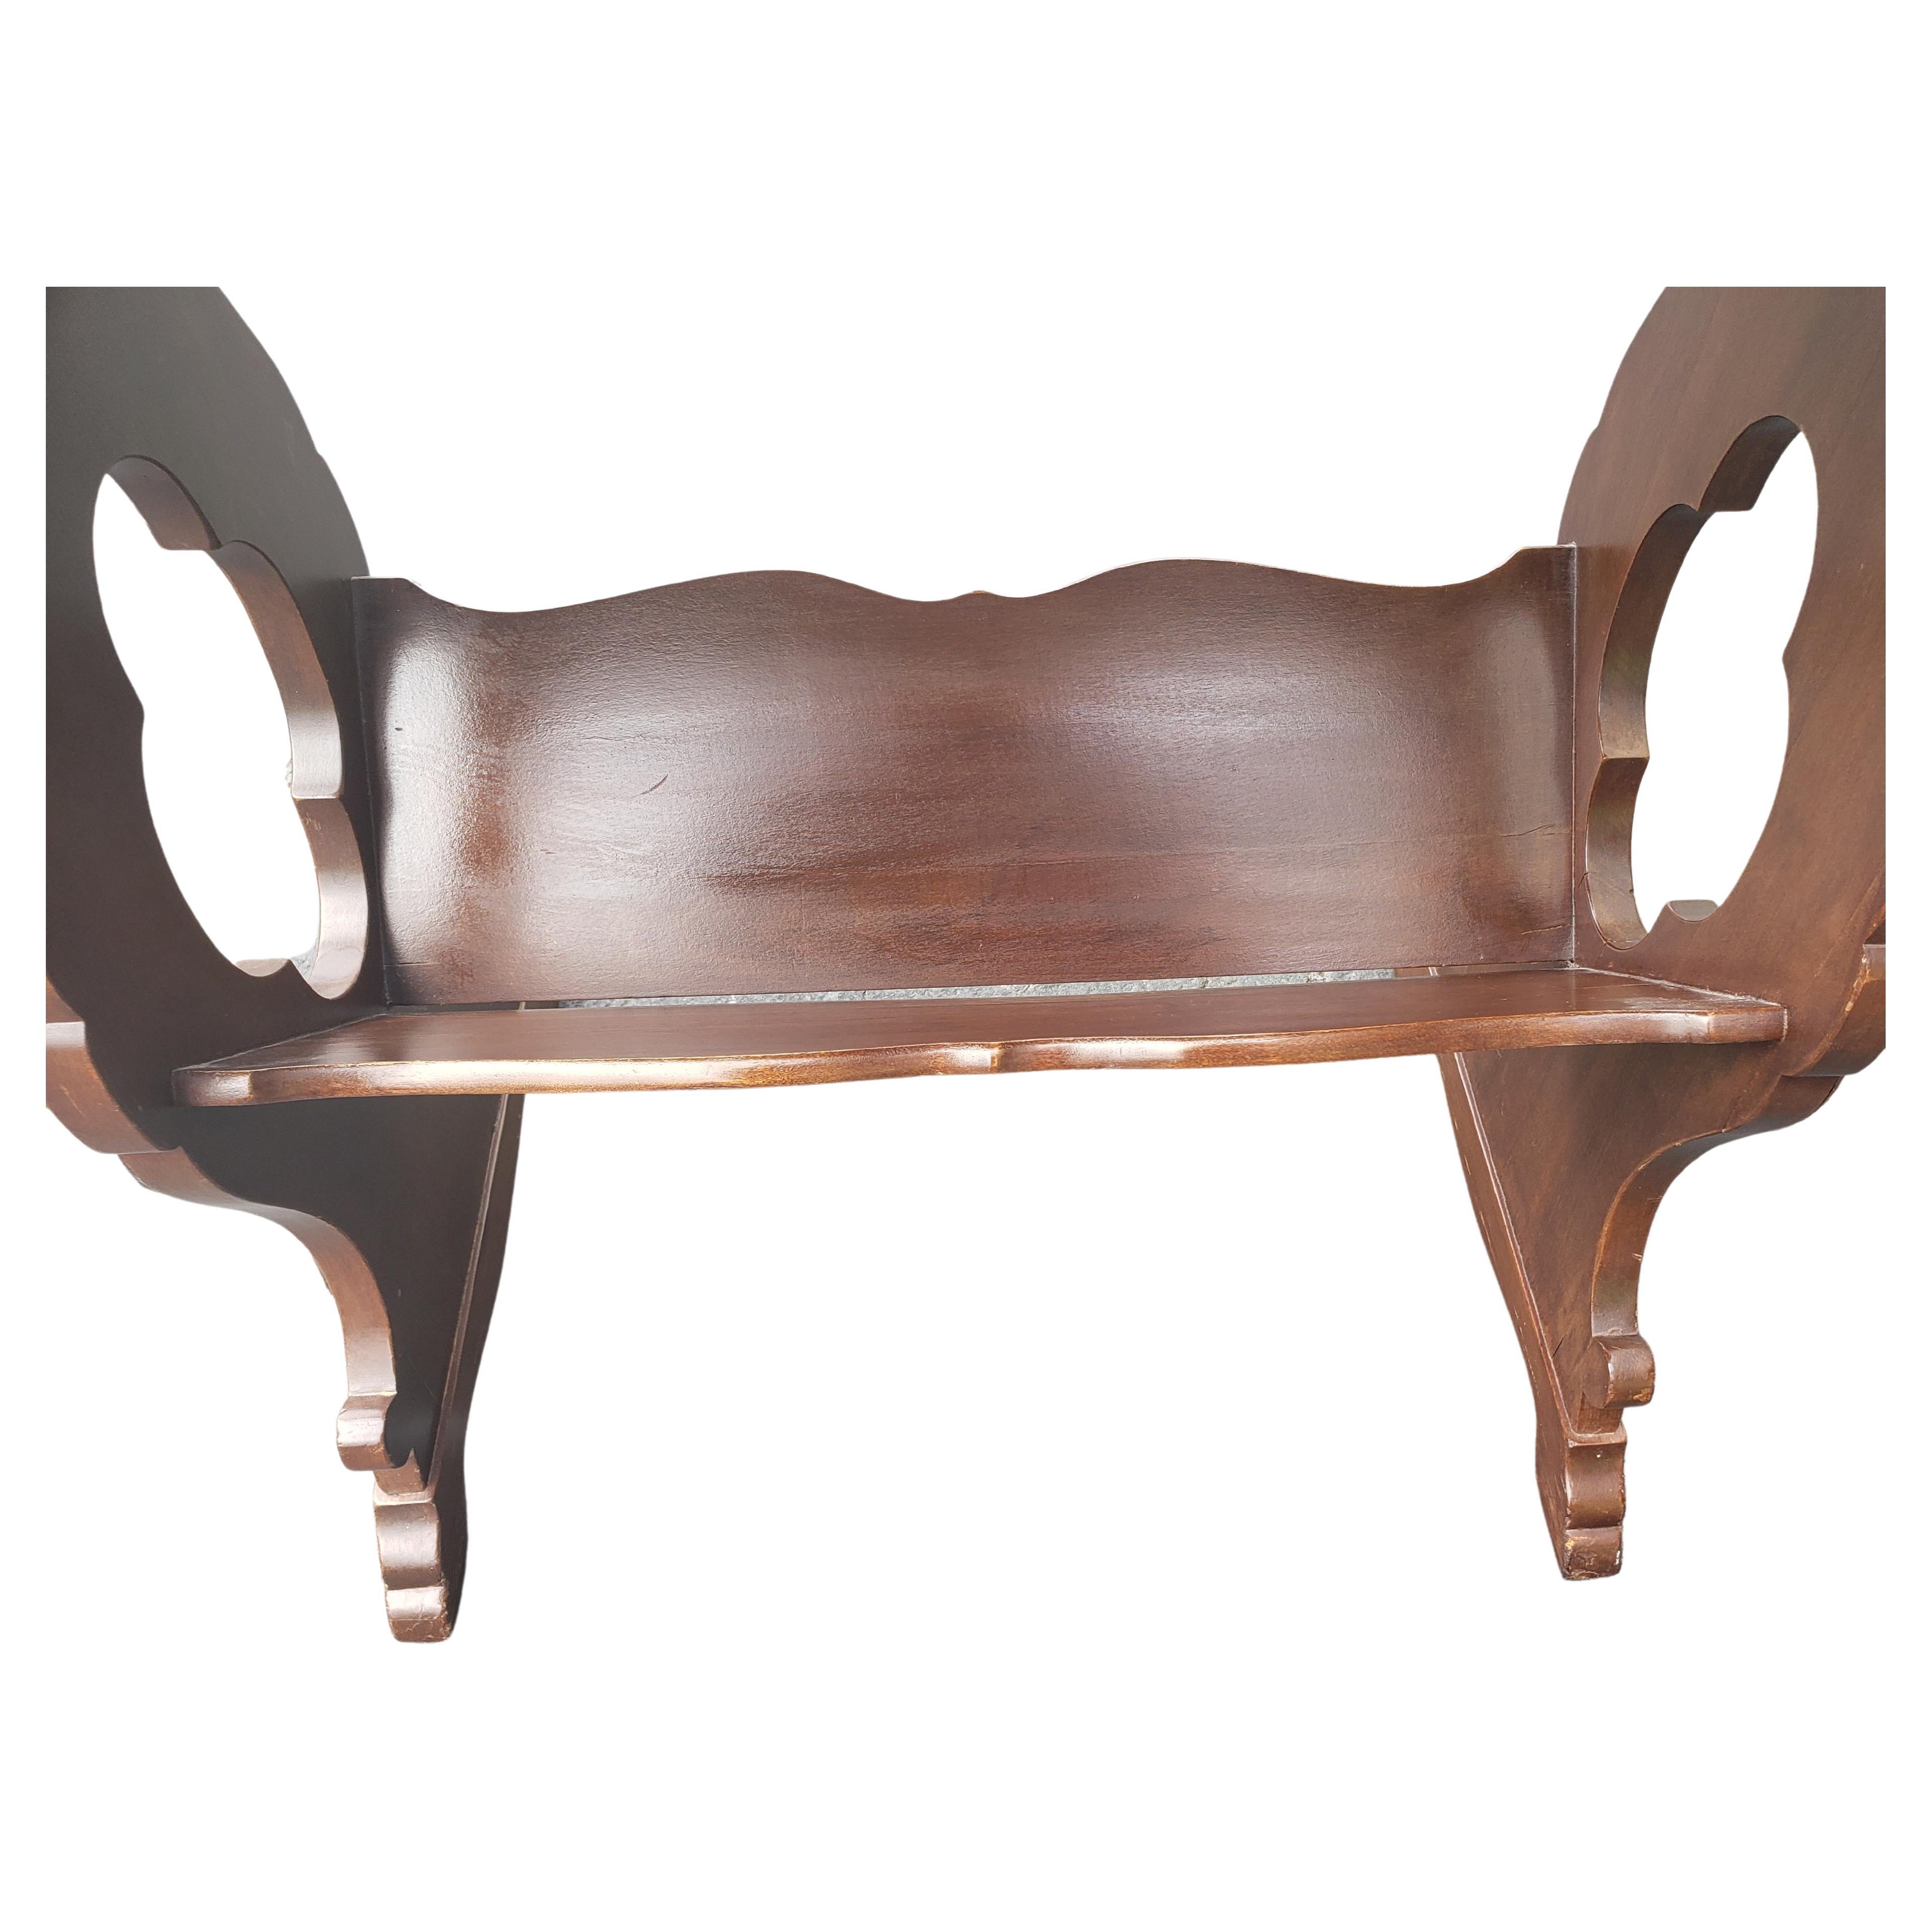 Hand-Carved Edwardian Mahogany Side Table Magazine Rack, Circa 1920s For Sale